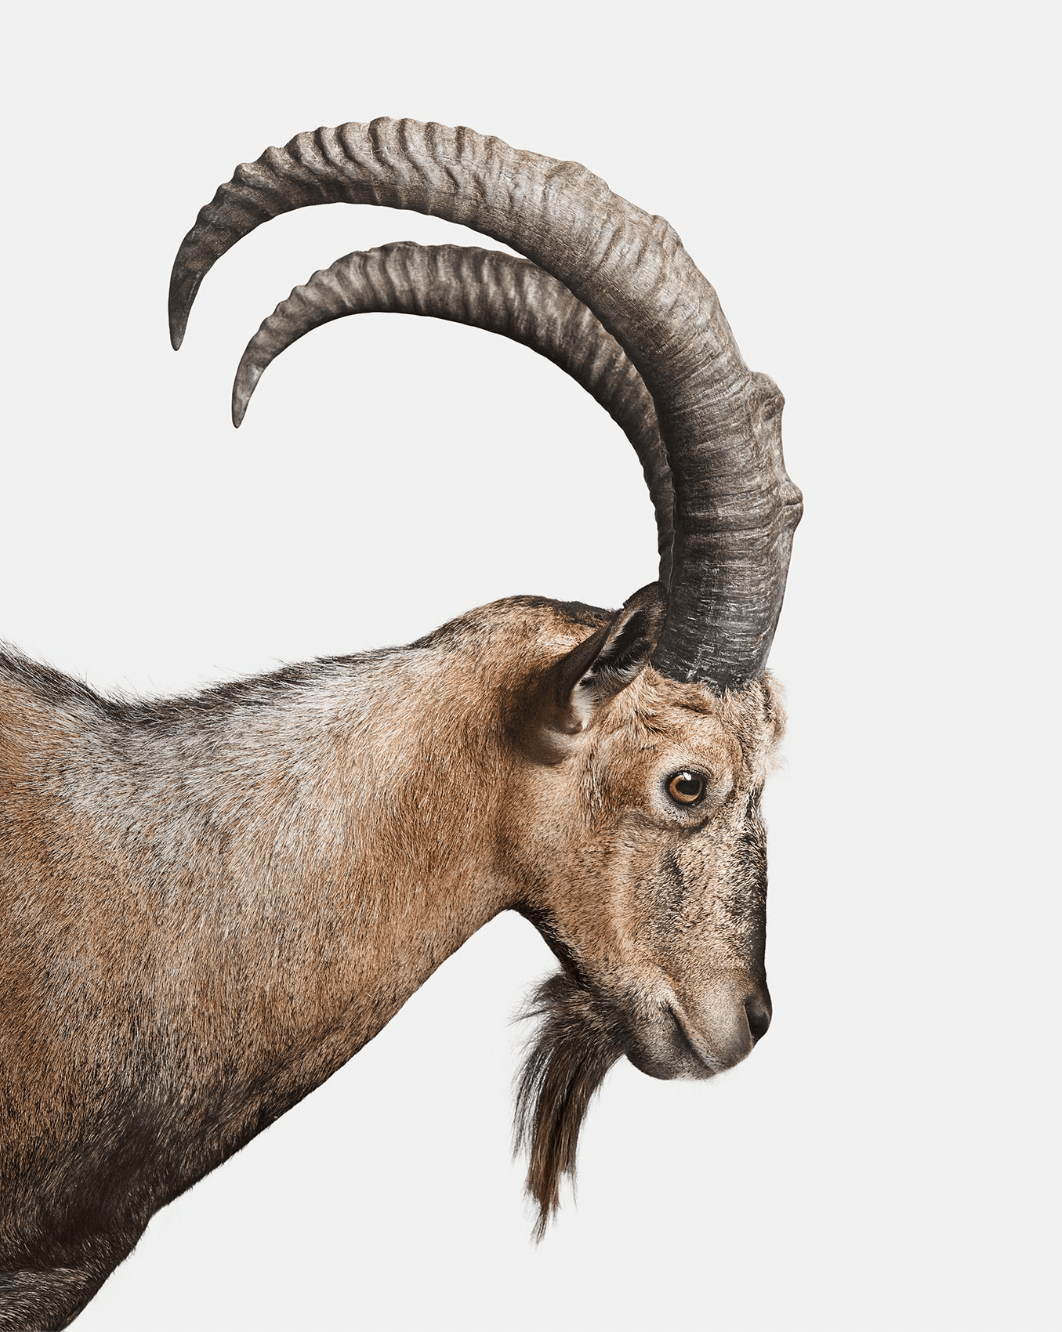 Ram portrait by fine art photographer Randal Ford, who brings his photos to life on ChromaLuxe Metal Prints.